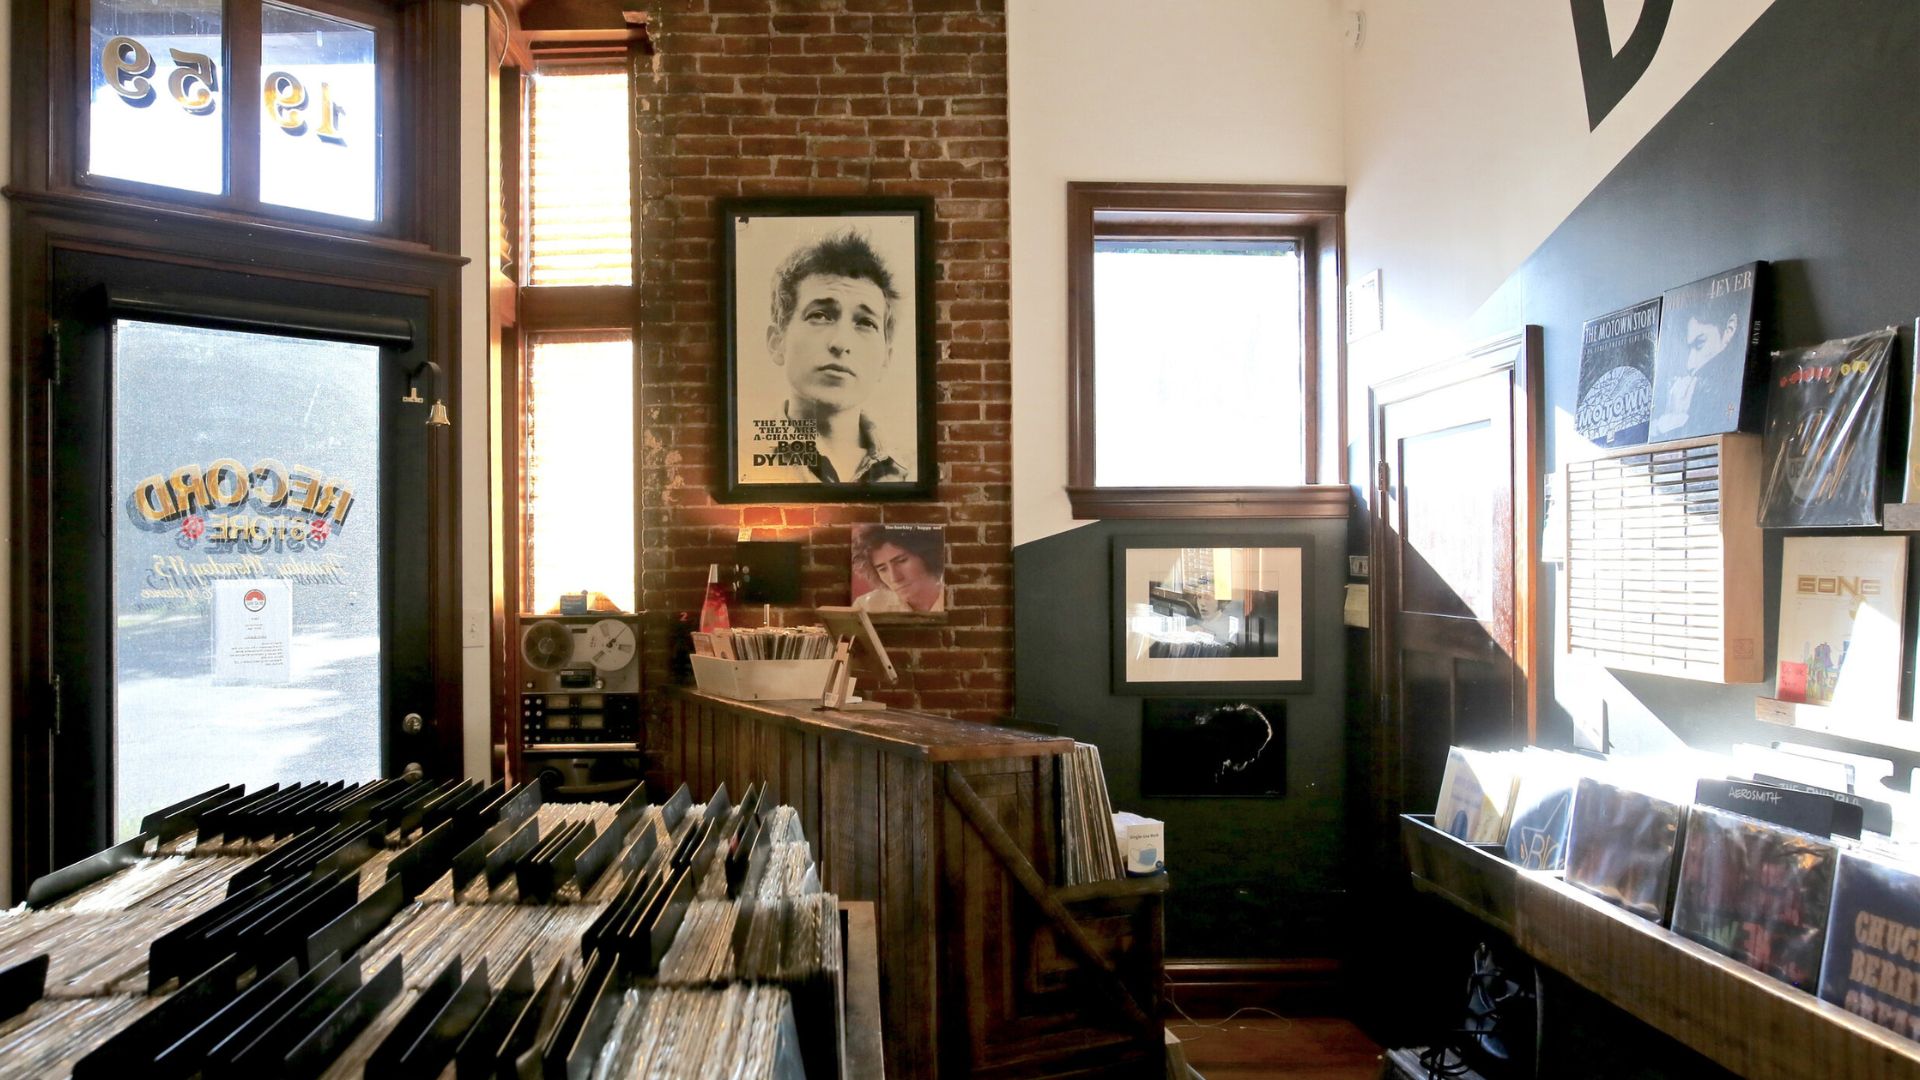 Dead Wax Records makes it into our St. Louis gift guide.